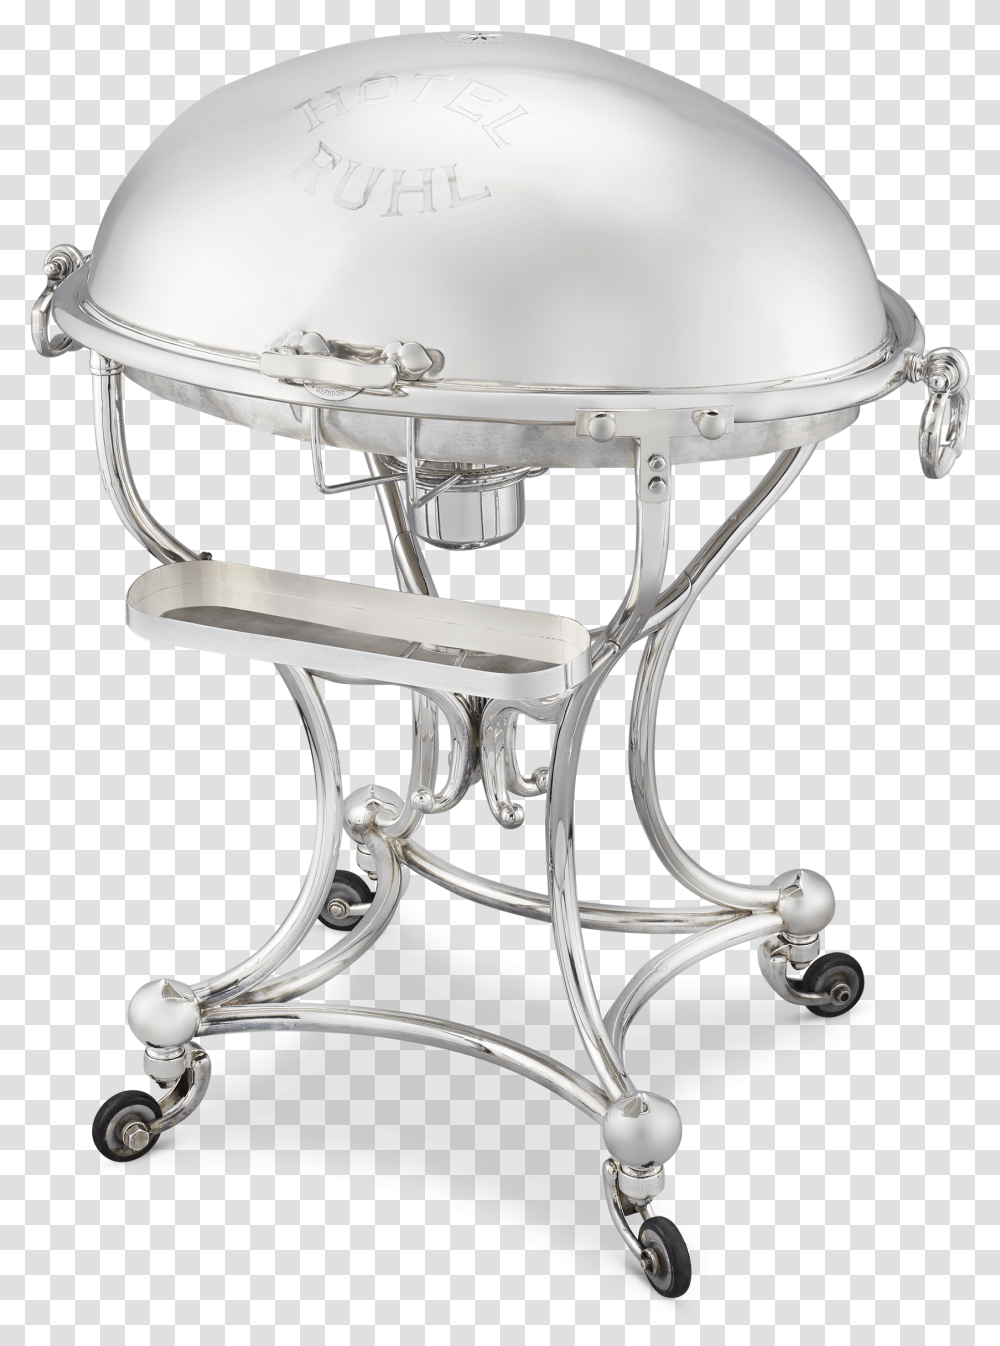 French Silverplate Meat Trolley Outdoor Grill Rack Amp Topper, Furniture, Helmet, Apparel Transparent Png